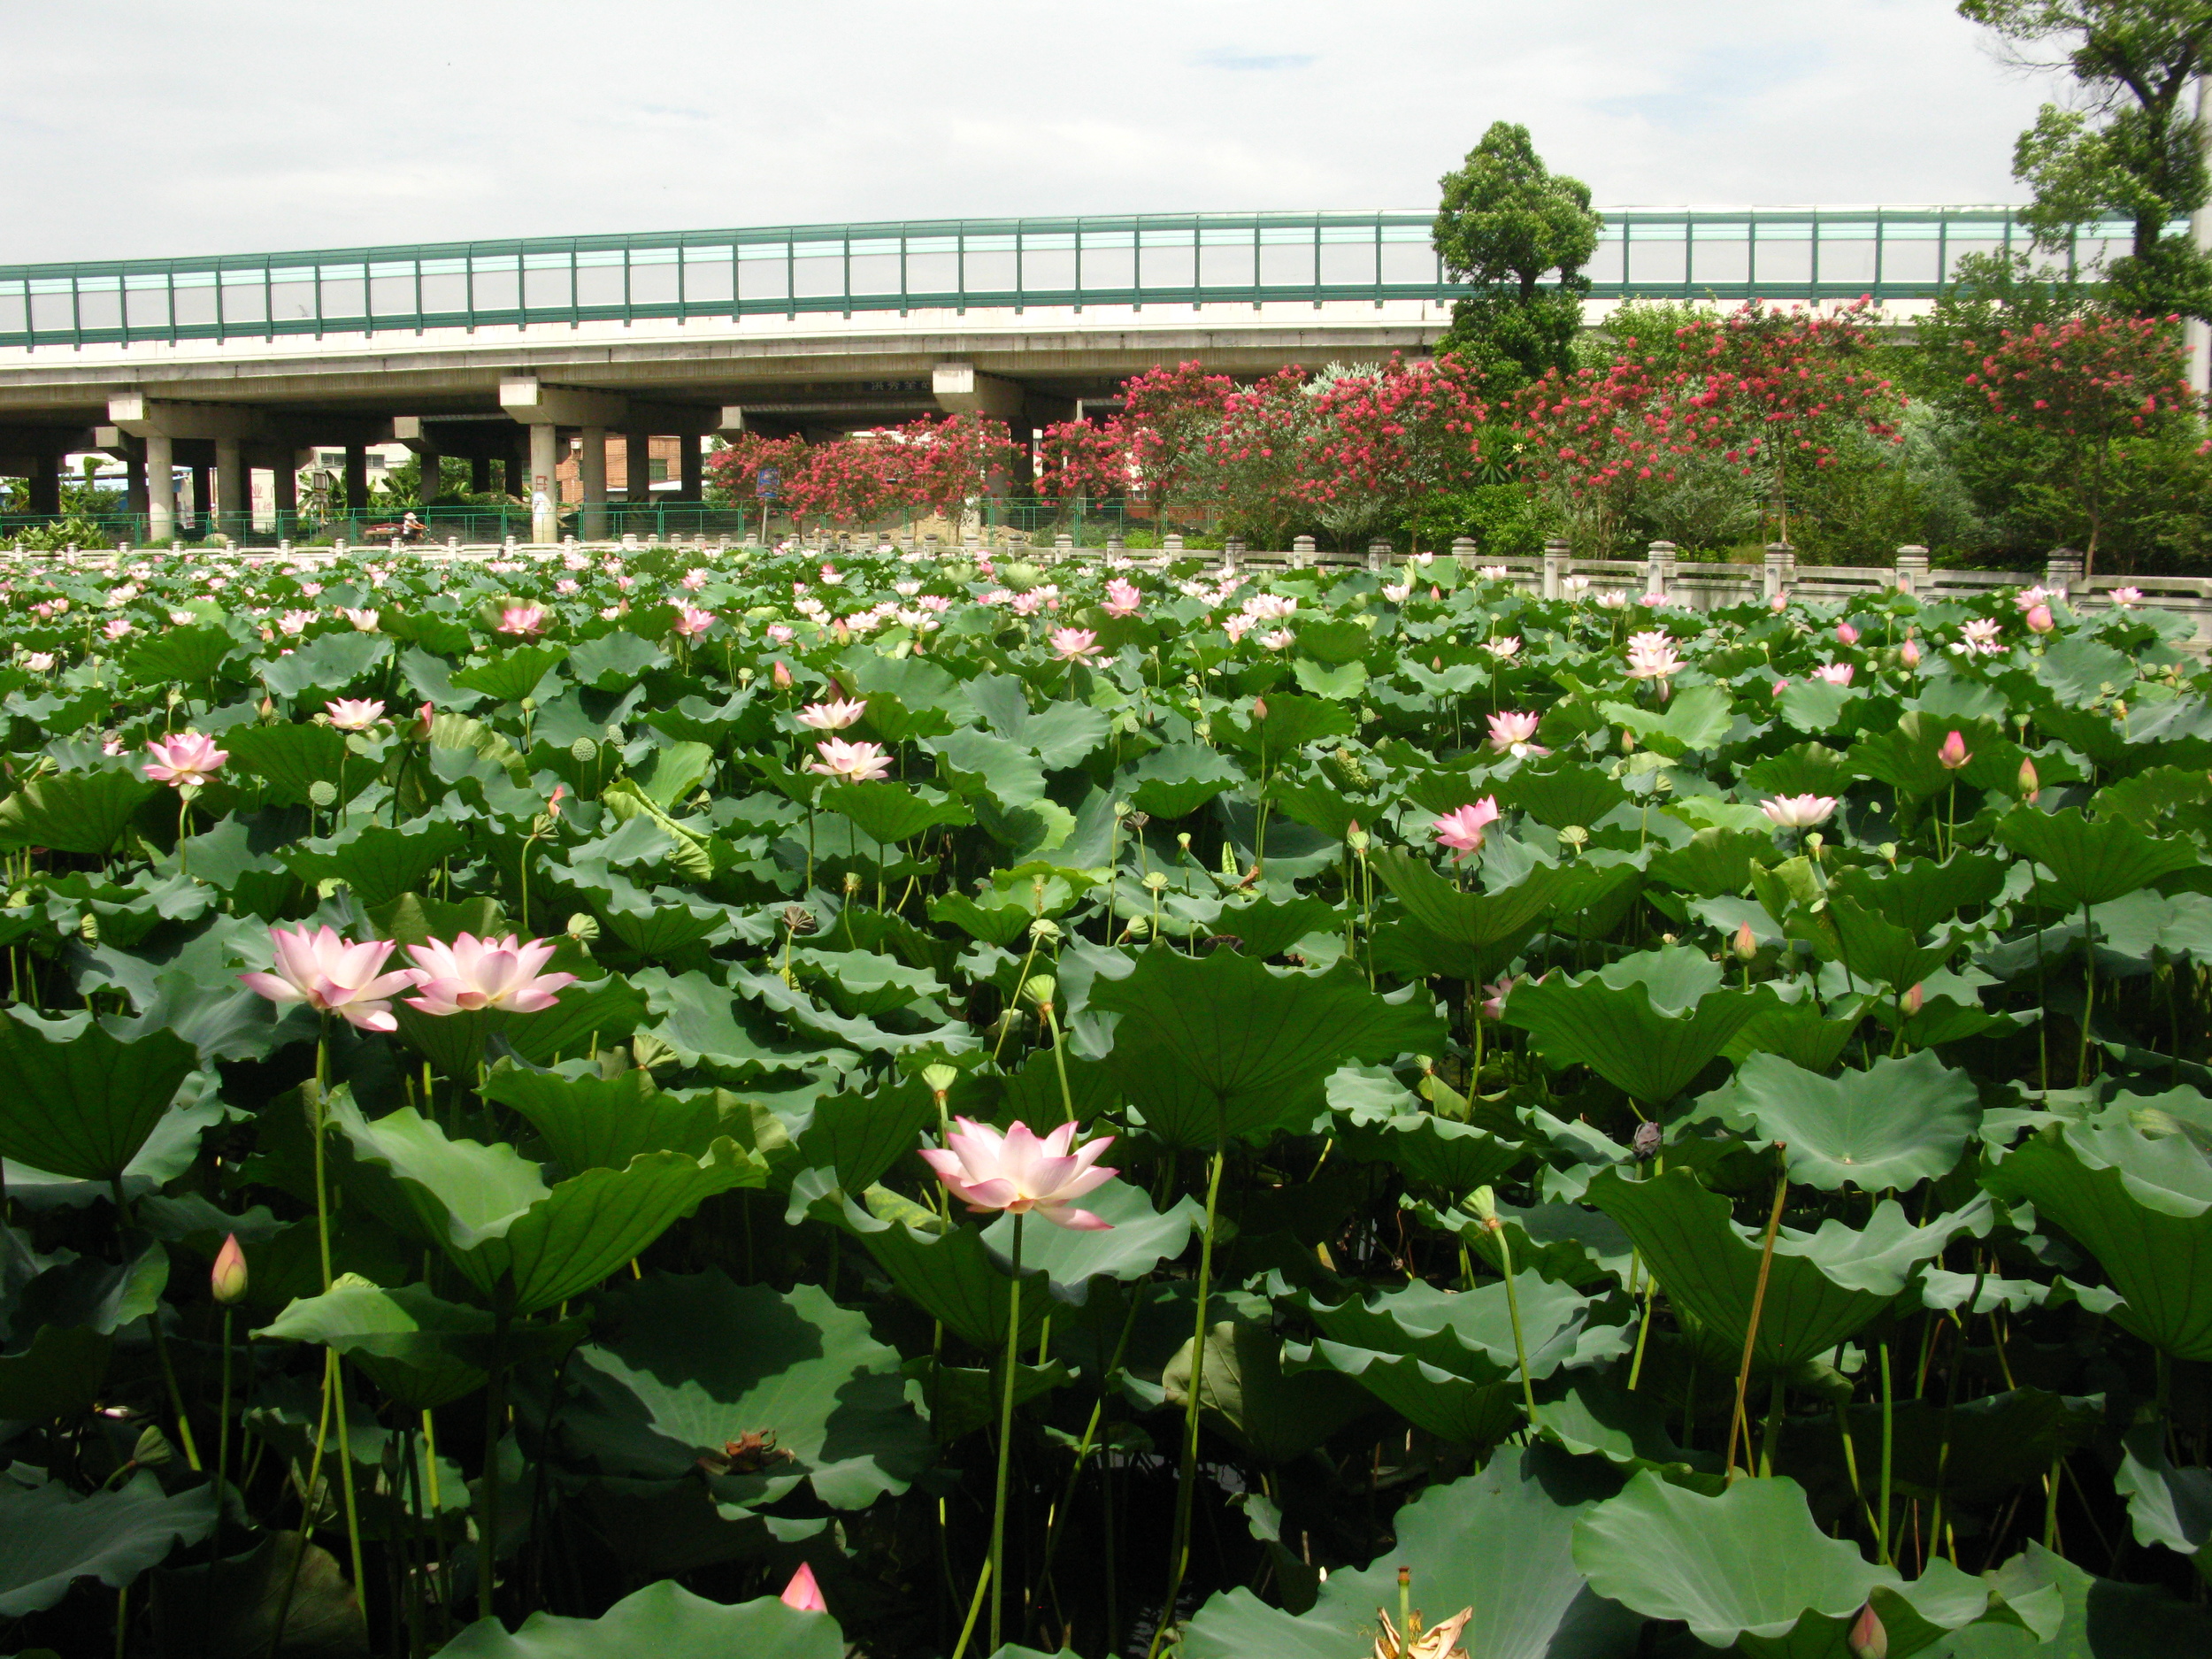 The lotus pad field at the entrance of the ancestral village.